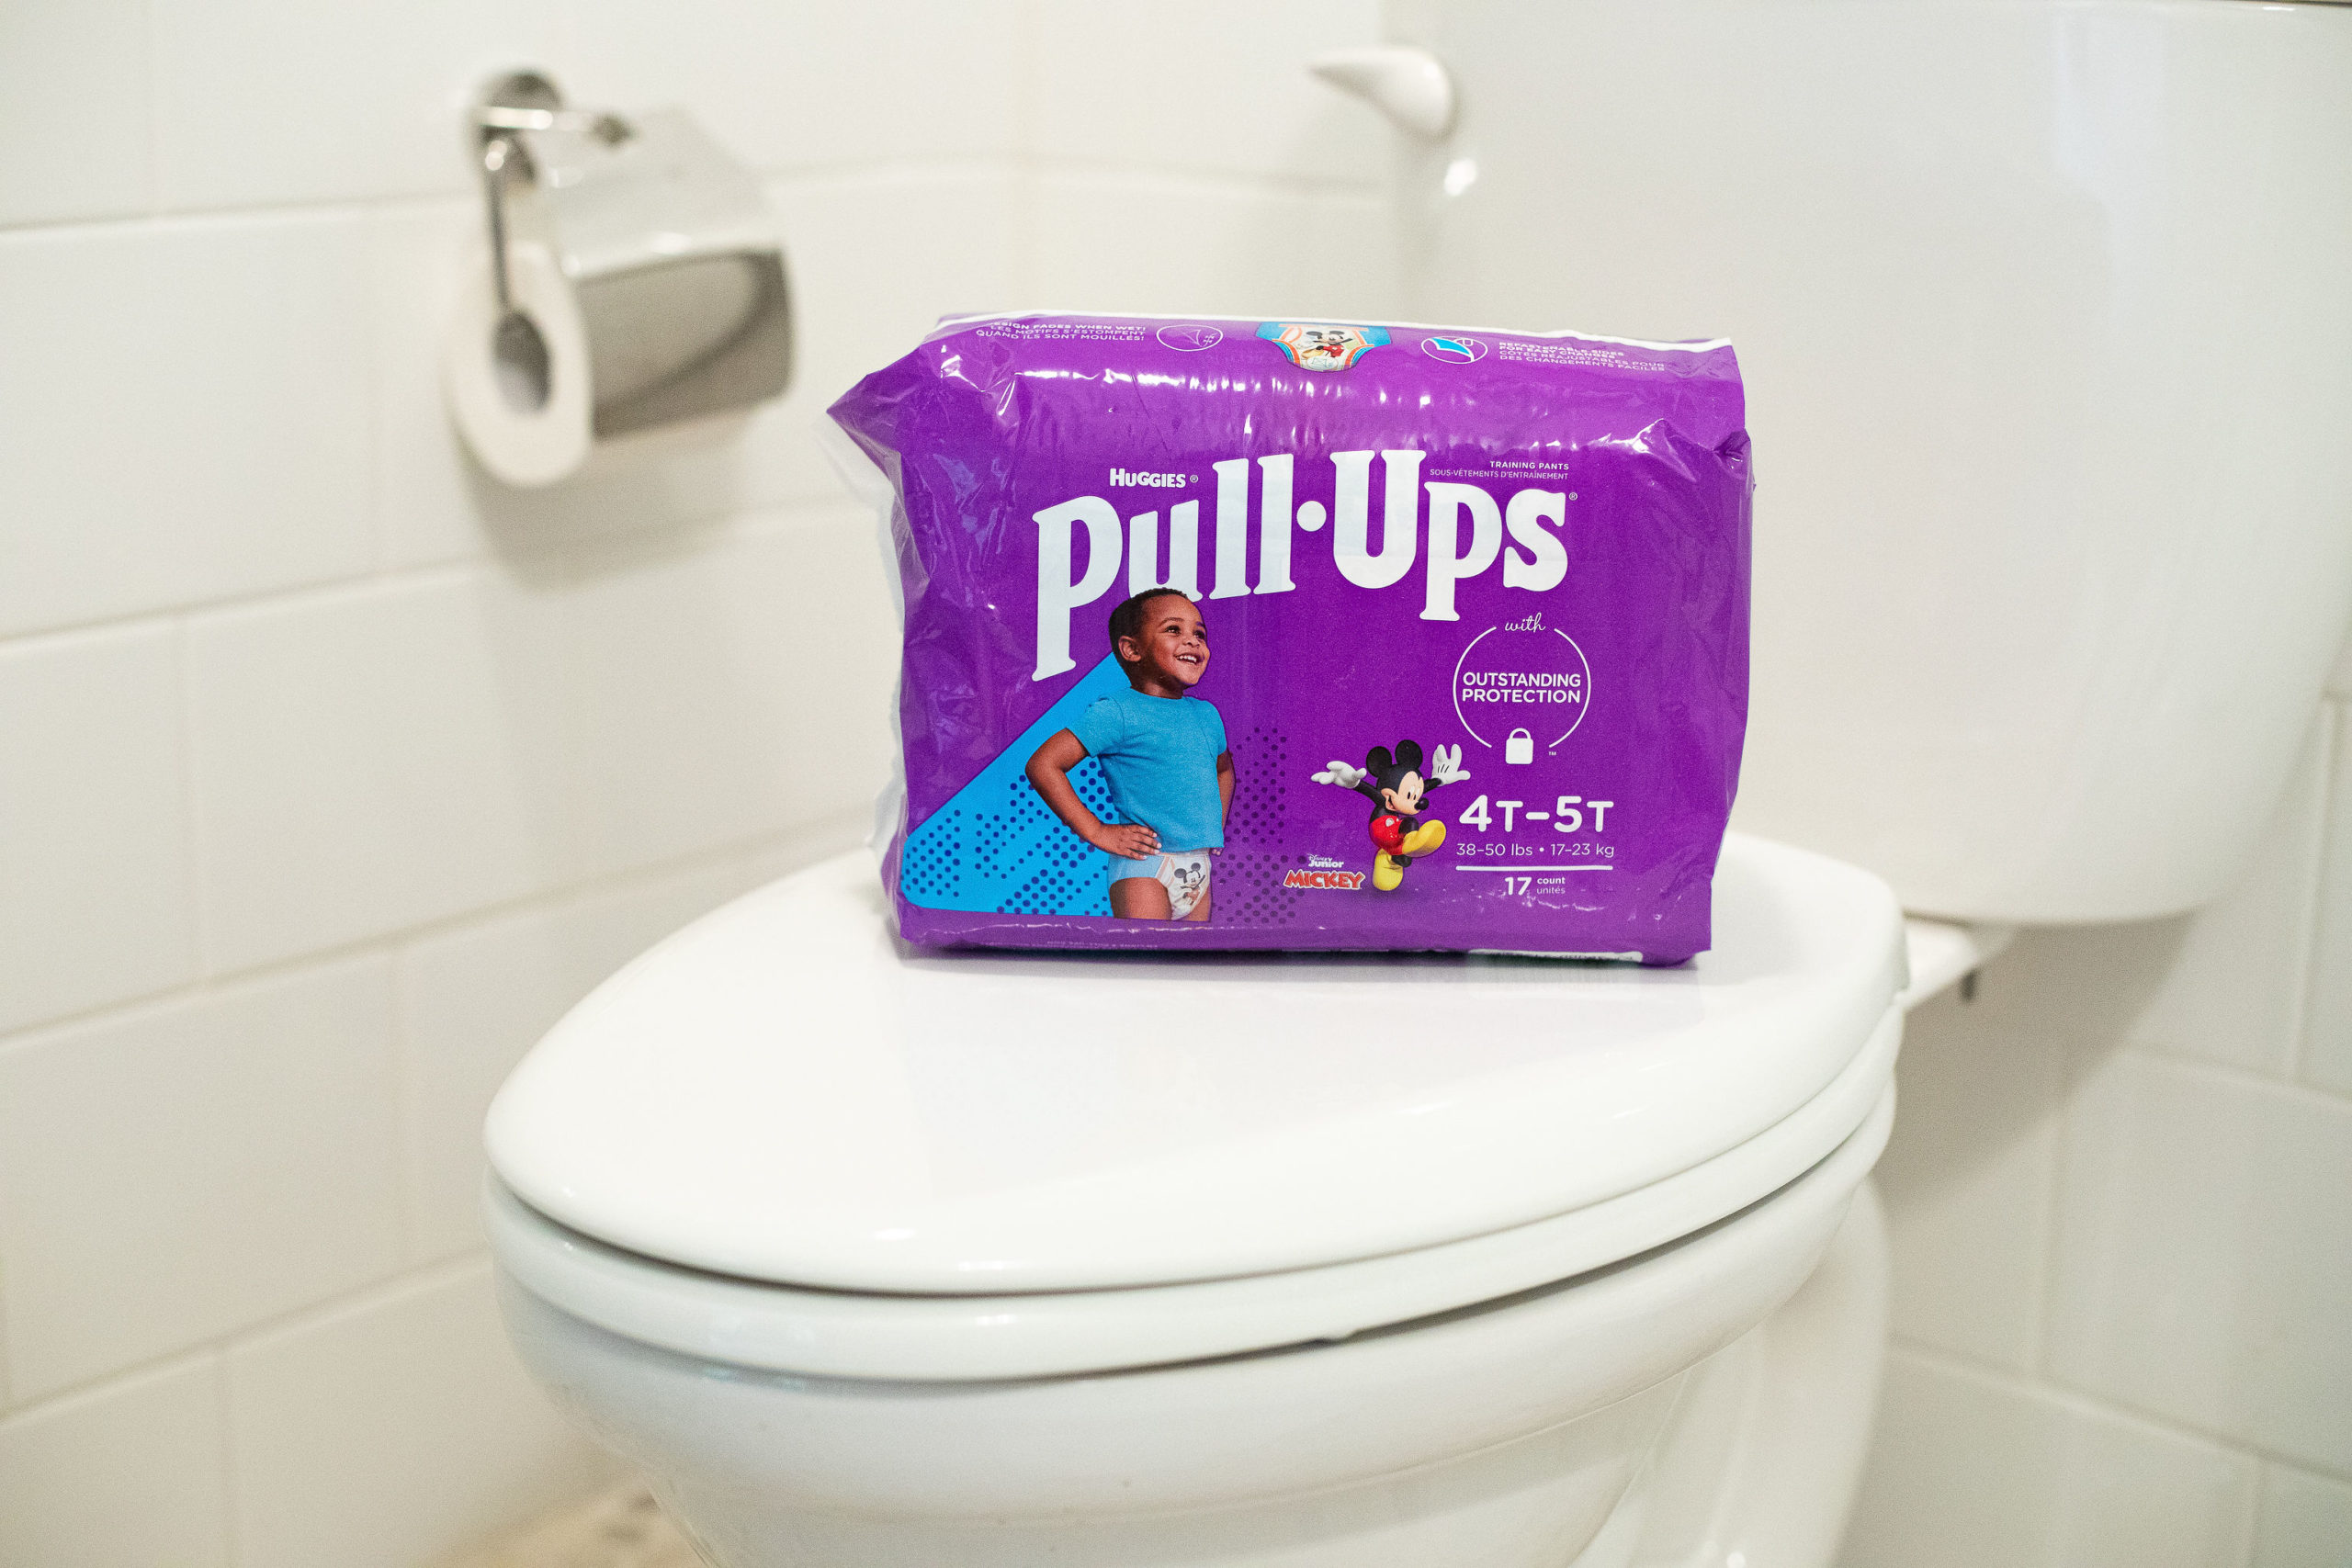 Grab A Fantastic Deal On Pull-Ups - Packs As Low As $5.99 At Publix on I Heart Publix 2